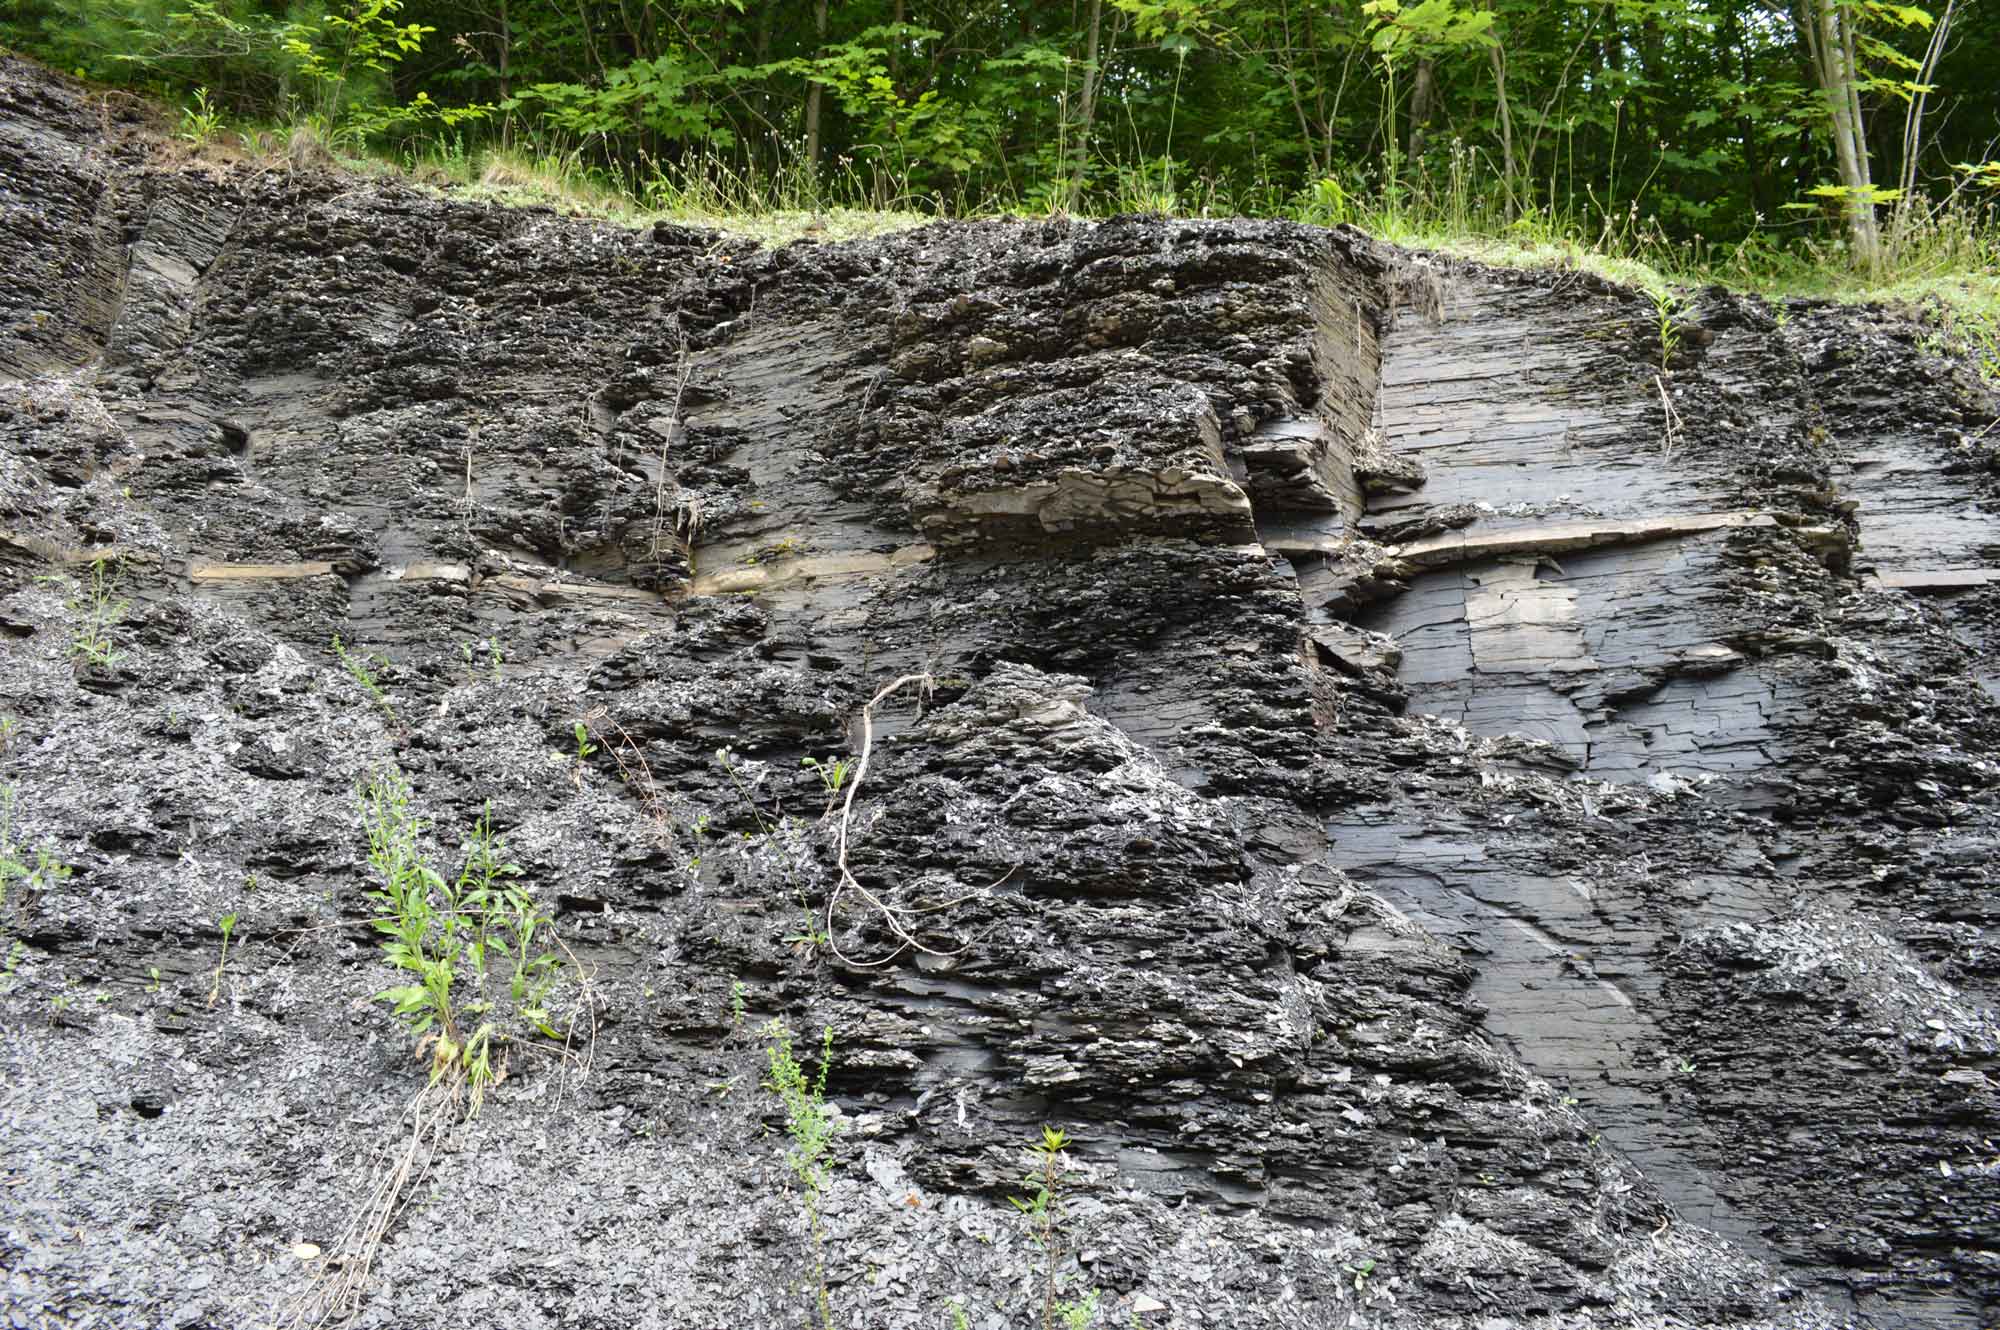 Photograph of an outcropping of the Utica Shale.